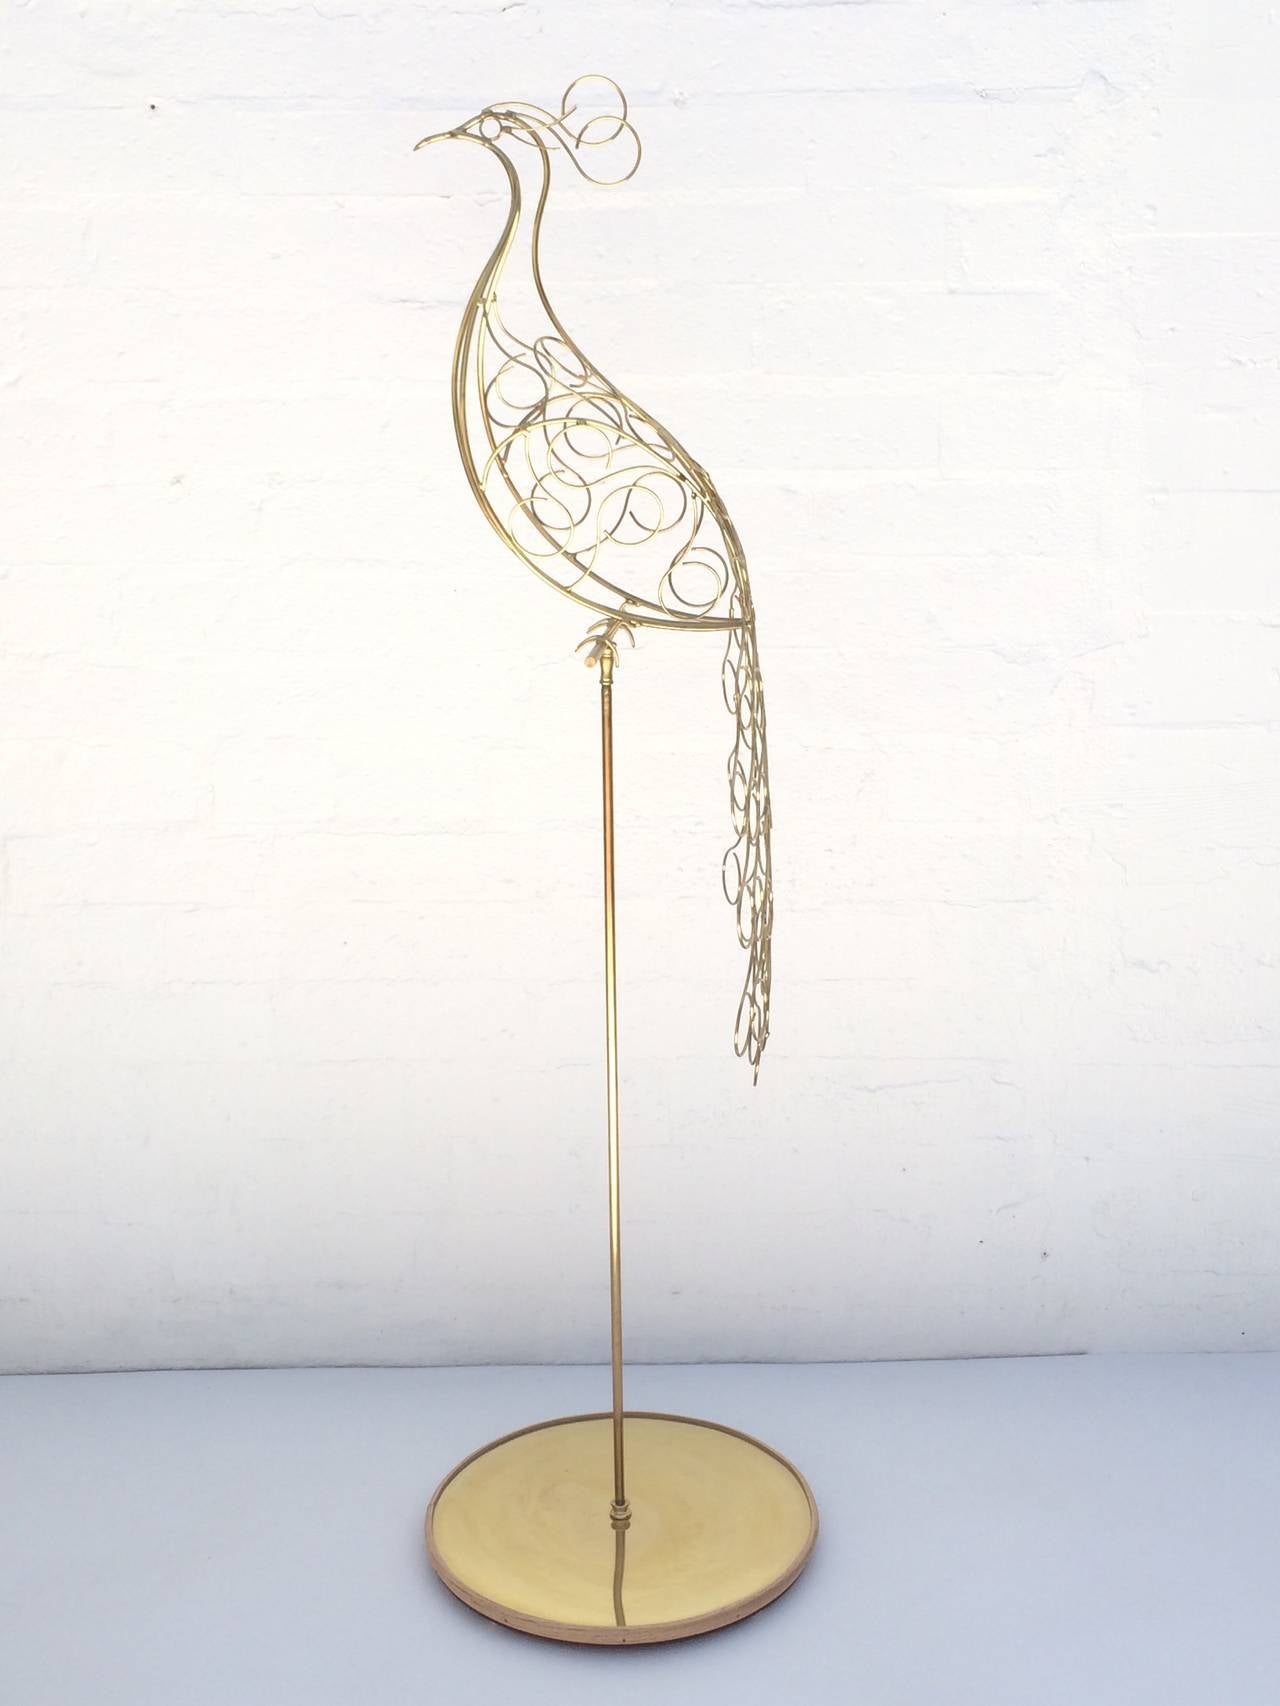 A stunnig freestanding brass peacock sculpture by Curtis Jere from the 1970s.